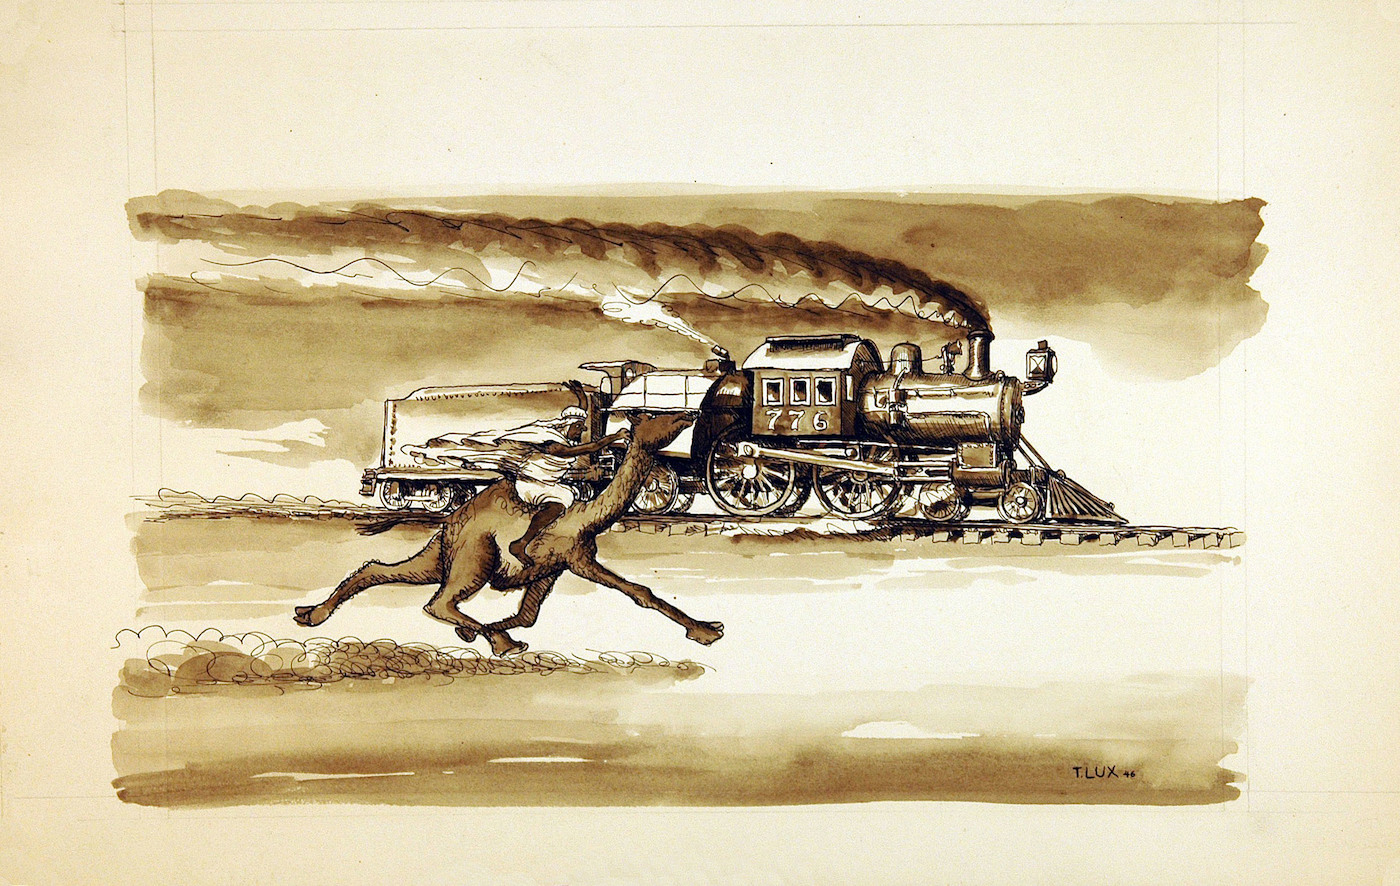 Bedouin and Camel racing against a Train